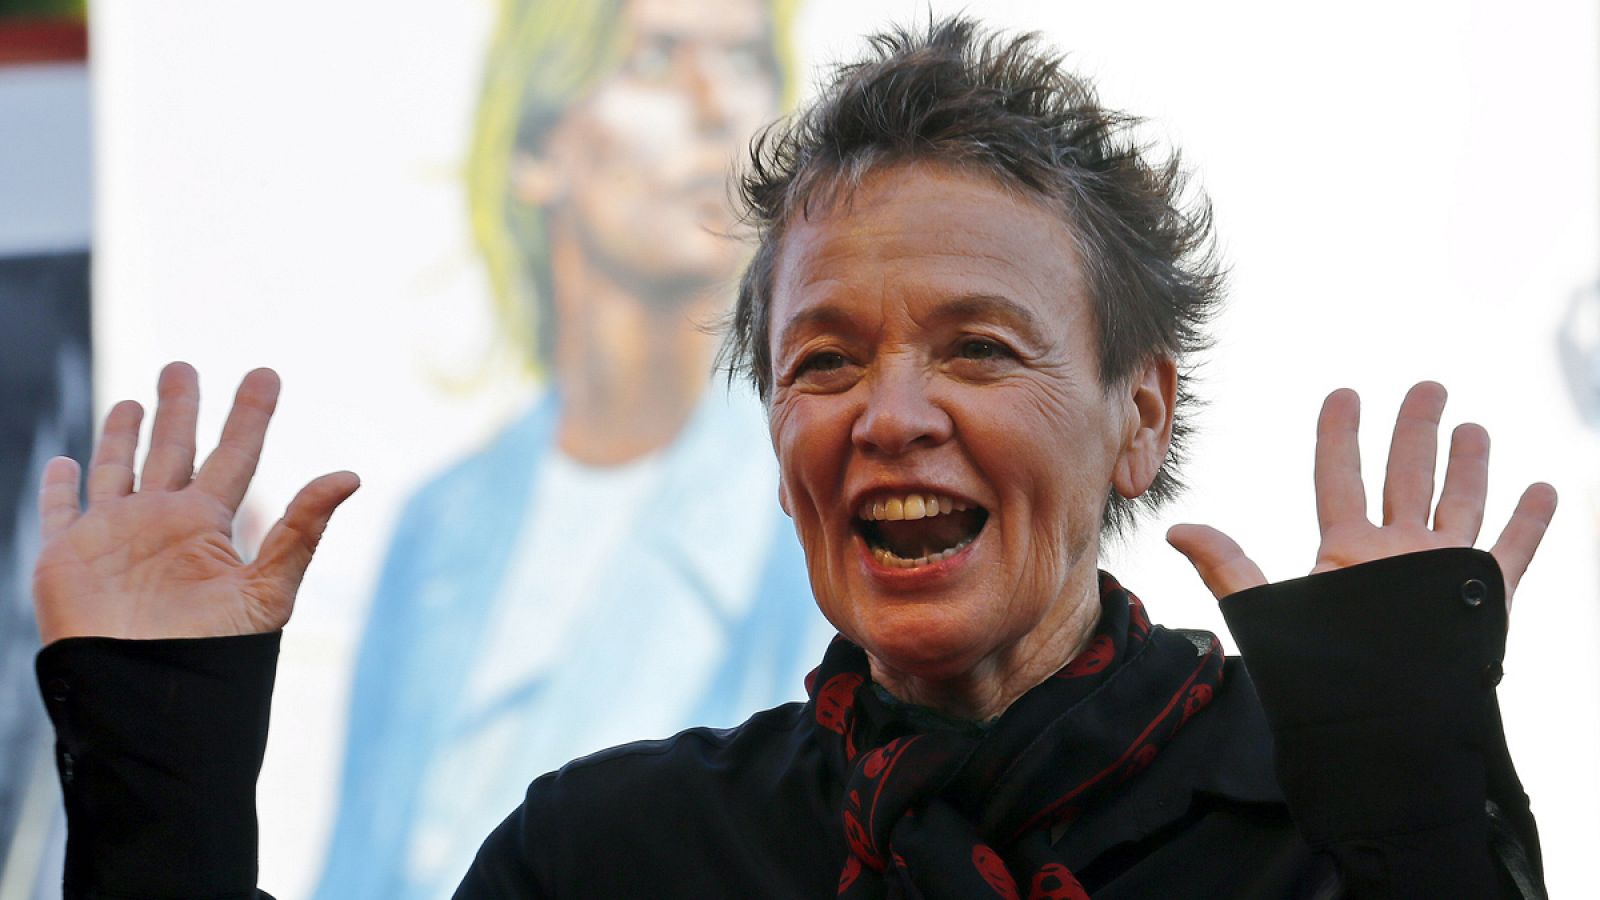 Director Laurie Anderson attends the red carpet event for the movie "The Heart of  Dog" at the 72nd Venice Film Festival